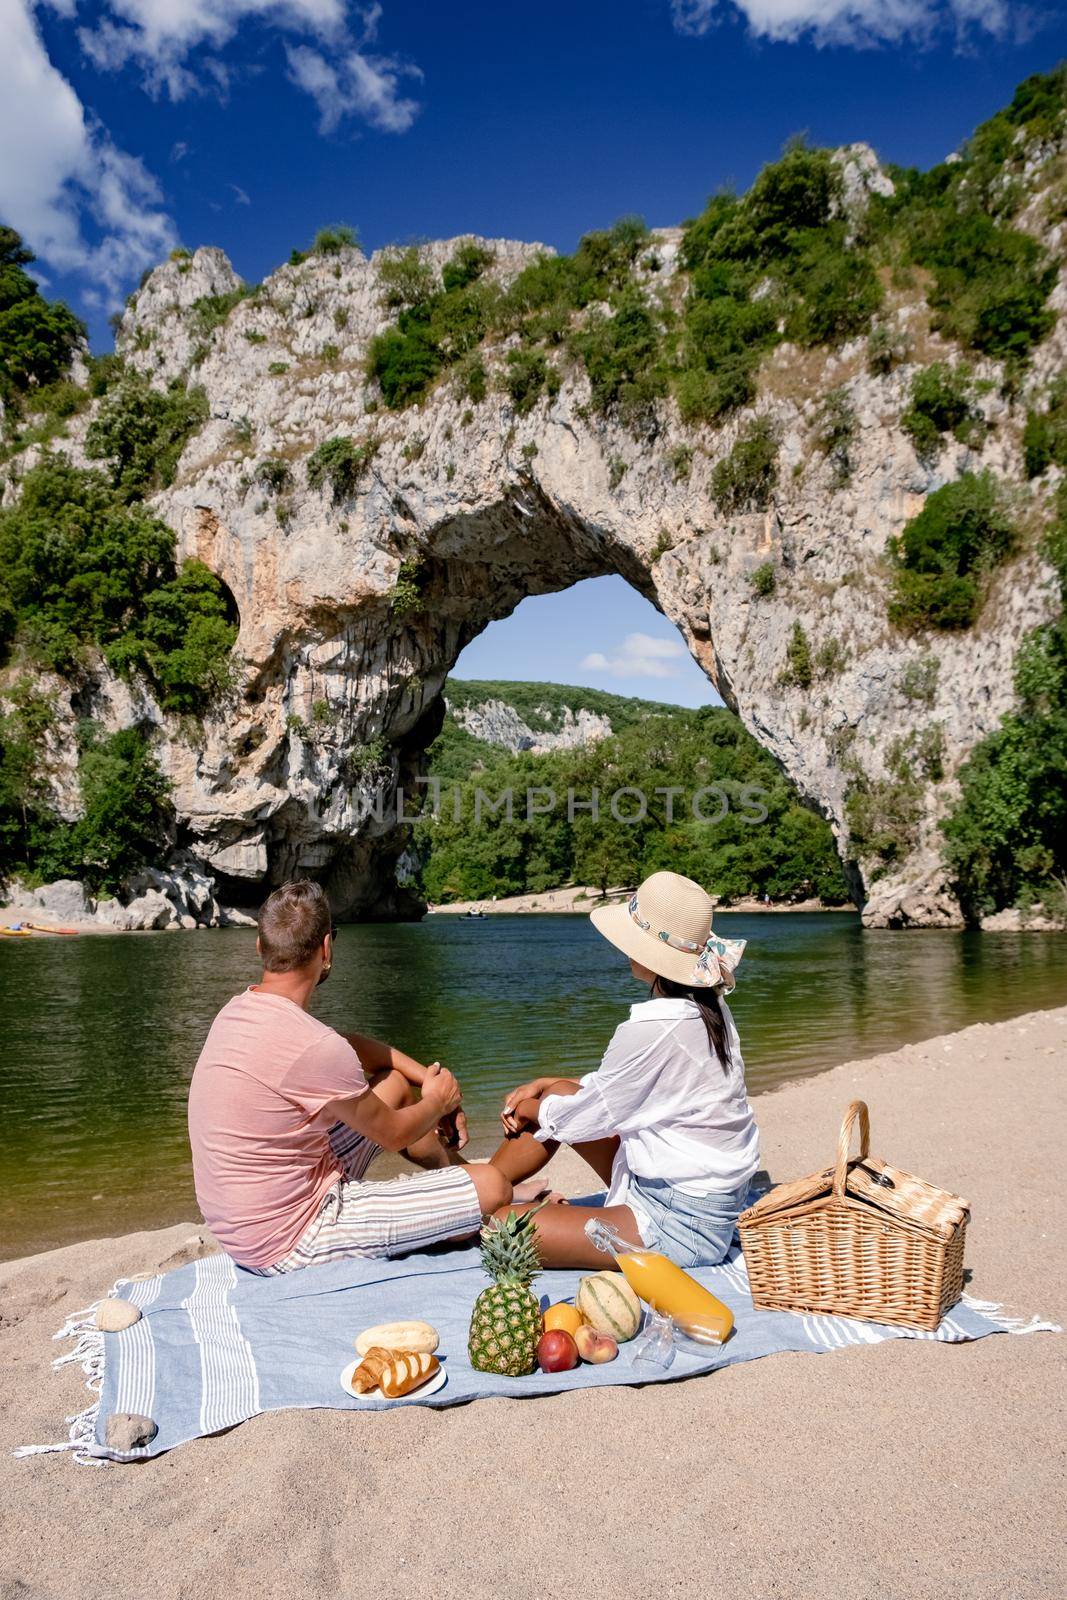 The famous natural bridge of Pont d'Arc in Ardeche department in France Ardeche by fokkebok